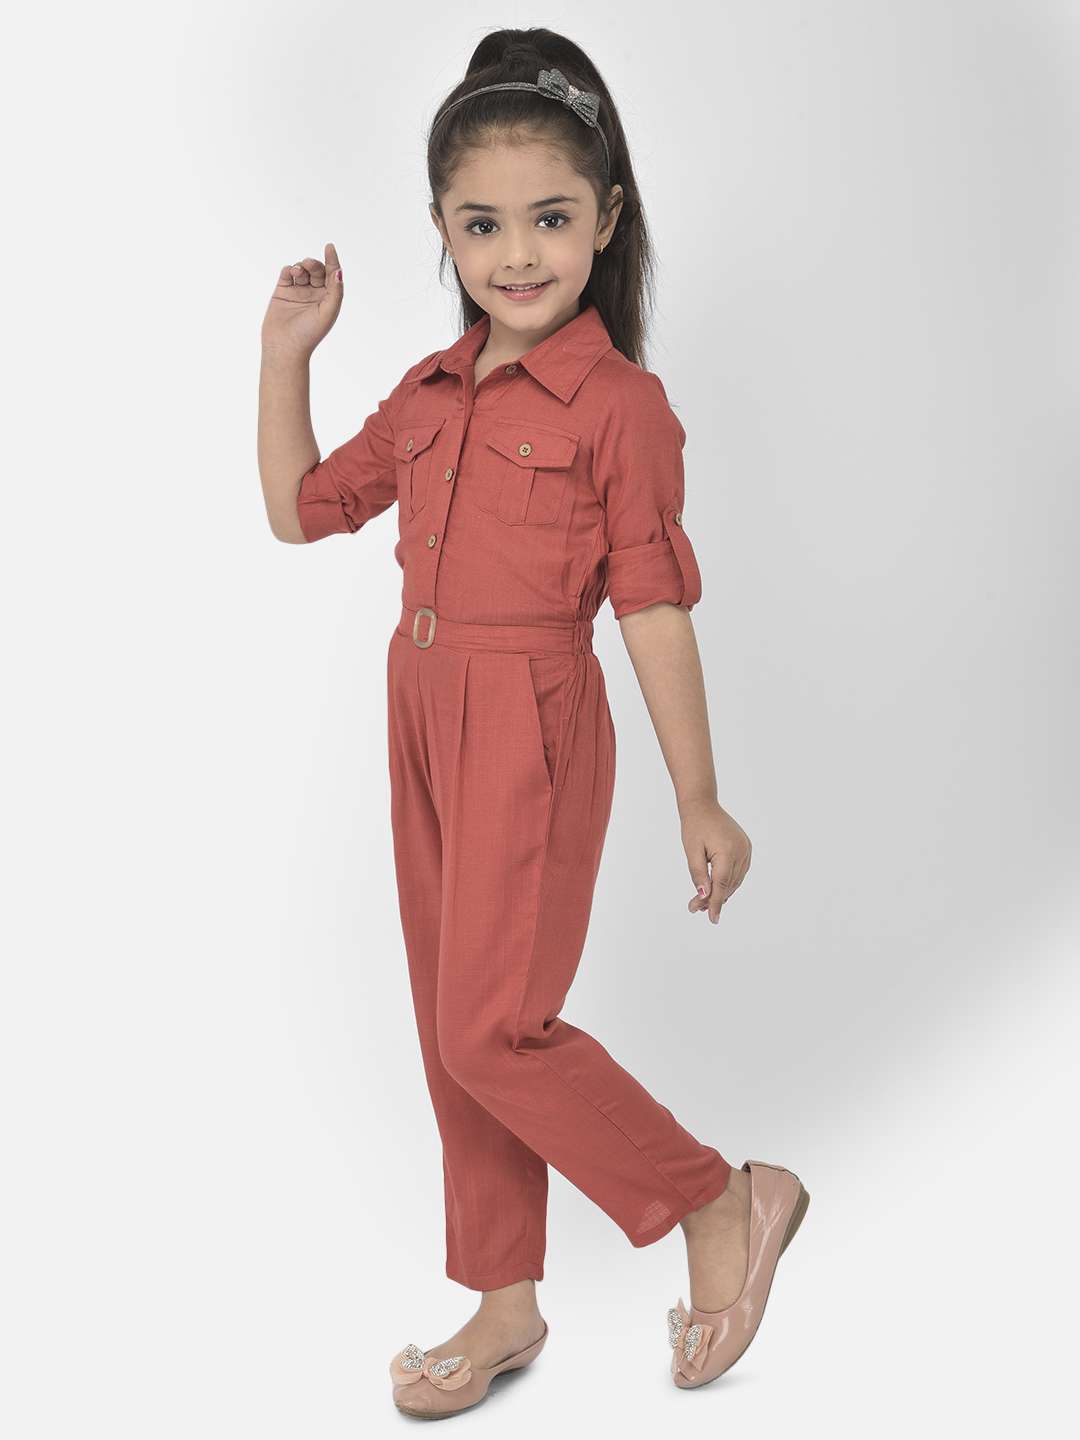 Buy Striped Girls Jumpsuit (10-11 Years) at Amazon.in